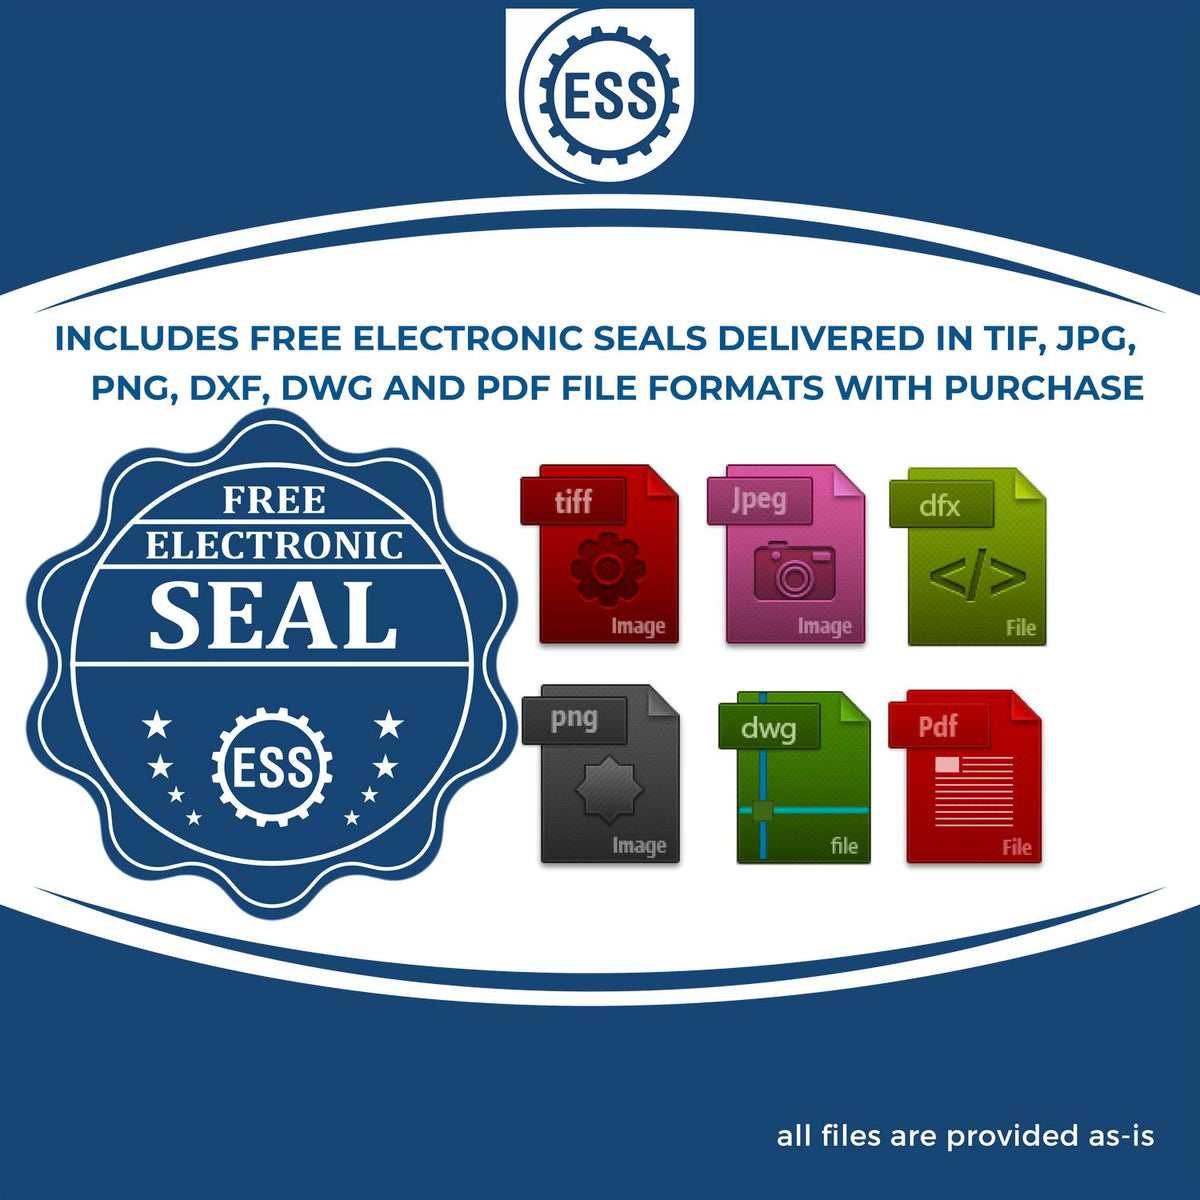 An infographic for the free electronic seal for the Self-Inking South Dakota Landscape Architect Stamp illustrating the different file type icons such as DXF, DWG, TIF, JPG and PNG.